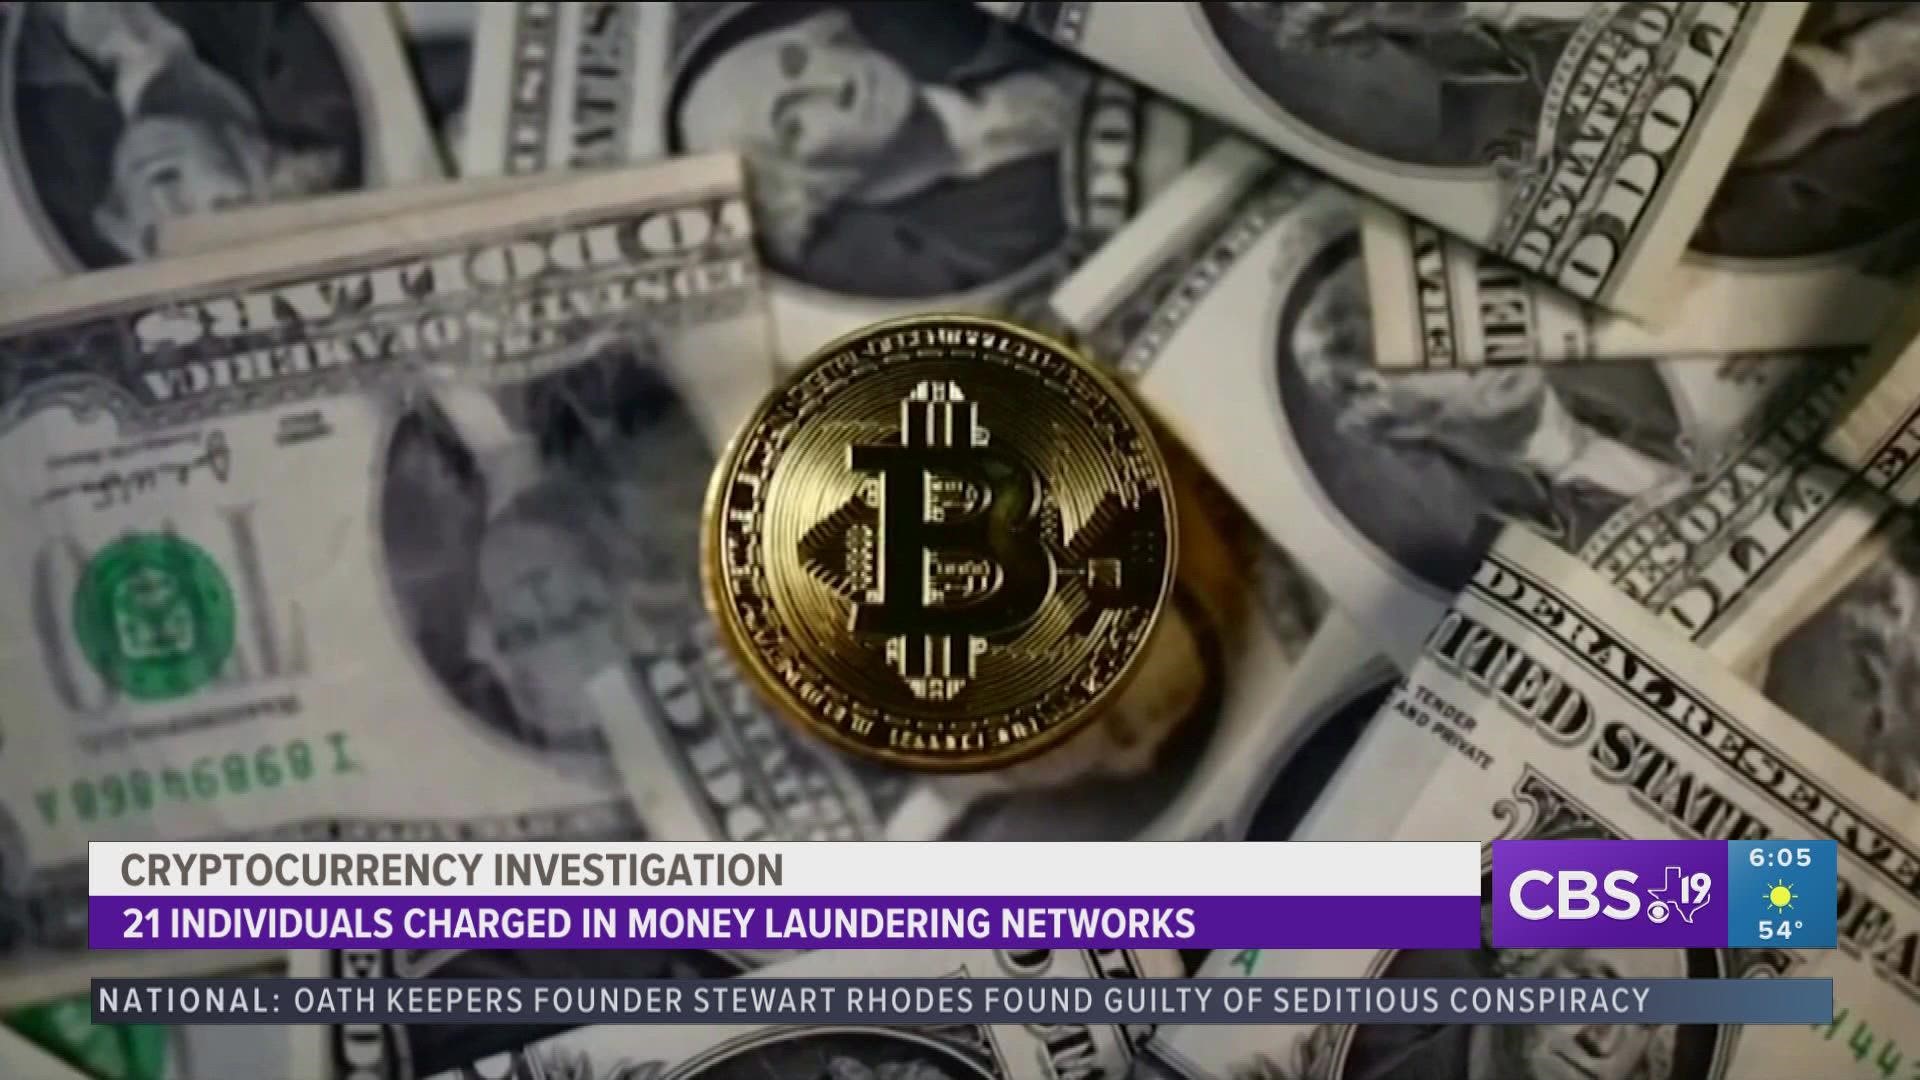 A multi-million money laundering network that involves crypto-currency was busted by federal authorities, in an operation that was initiated right here in East Texas